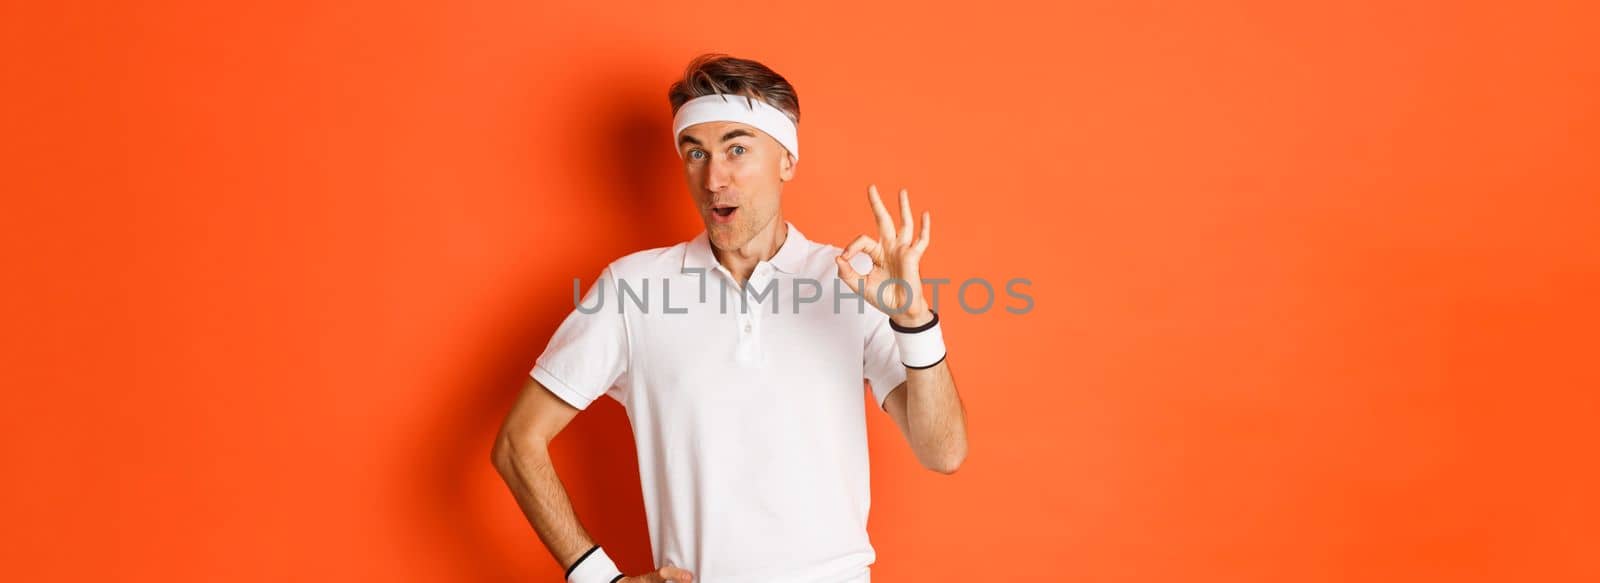 Concept of sport, fitness and lifestyle. Portrait of amazed adult man in workout uniform, showing okay sign and looking impressed, standing over orange background.